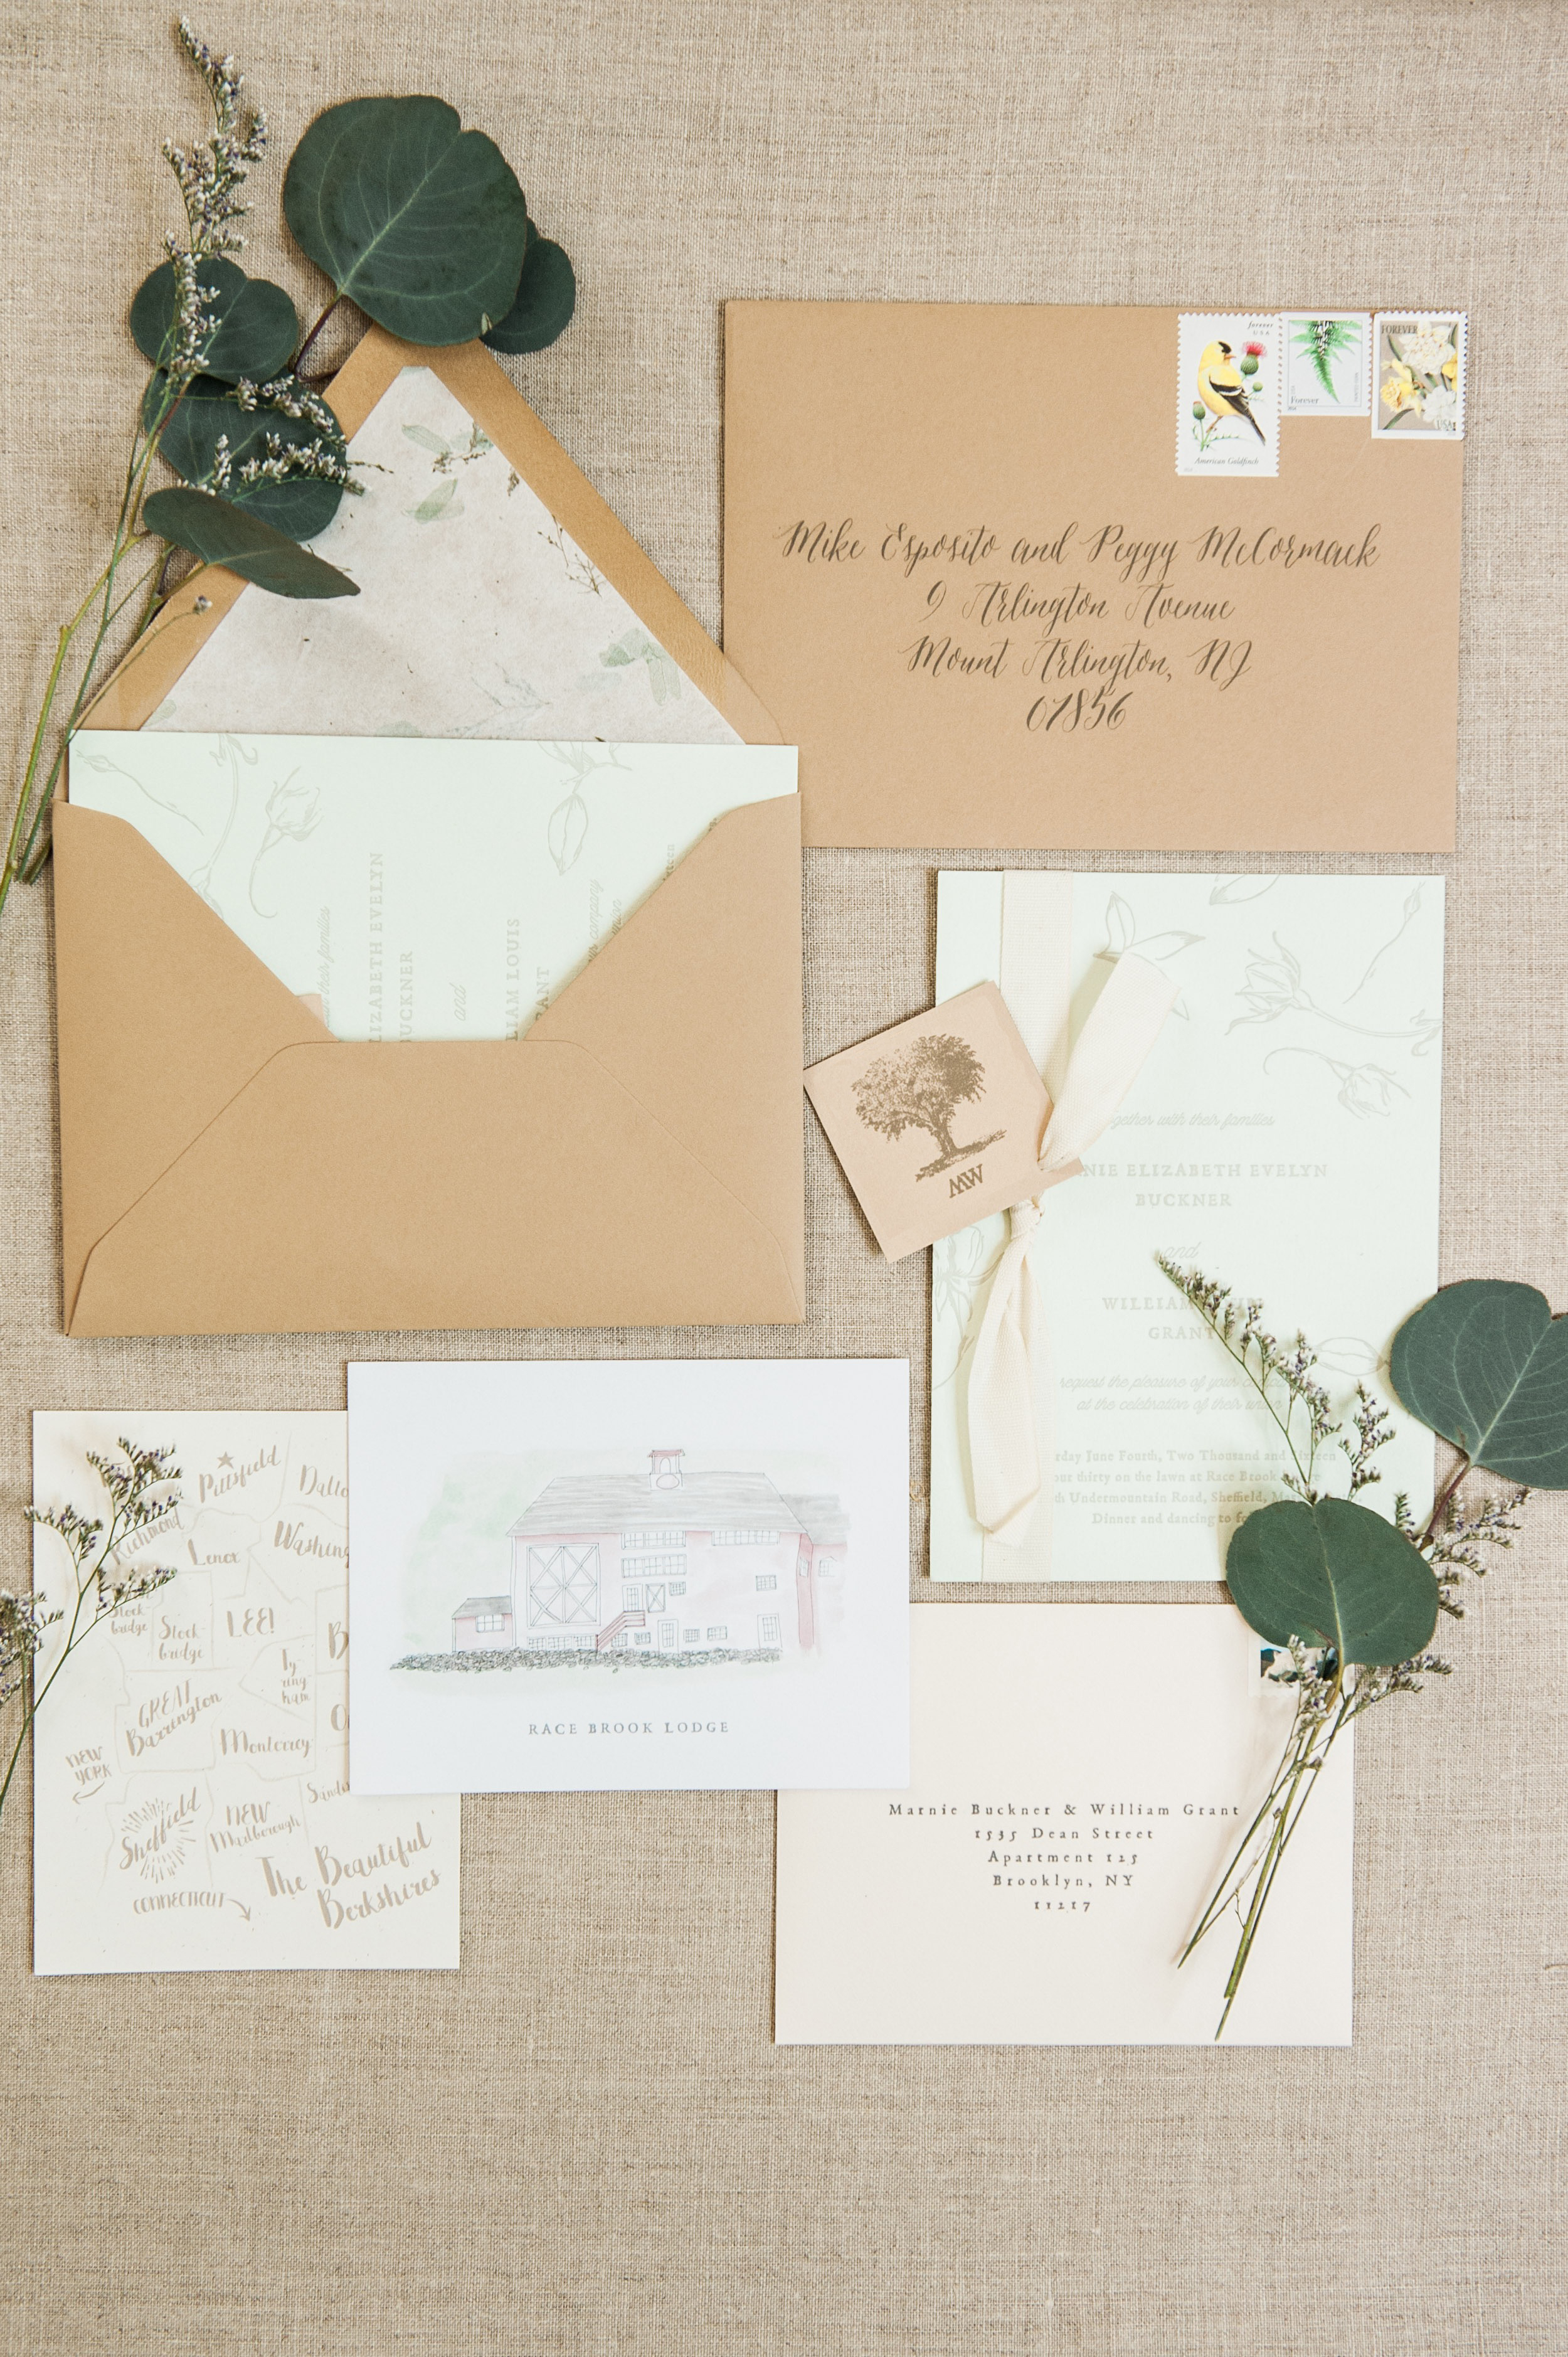  The main card, letterpress printed in pale gray on a duplexed pale green card, was inspired by spring with whimsical buds and leaves floating around a simple but vintage type treatment. We chose a handmade paper envelope liner with real leaf inclusi